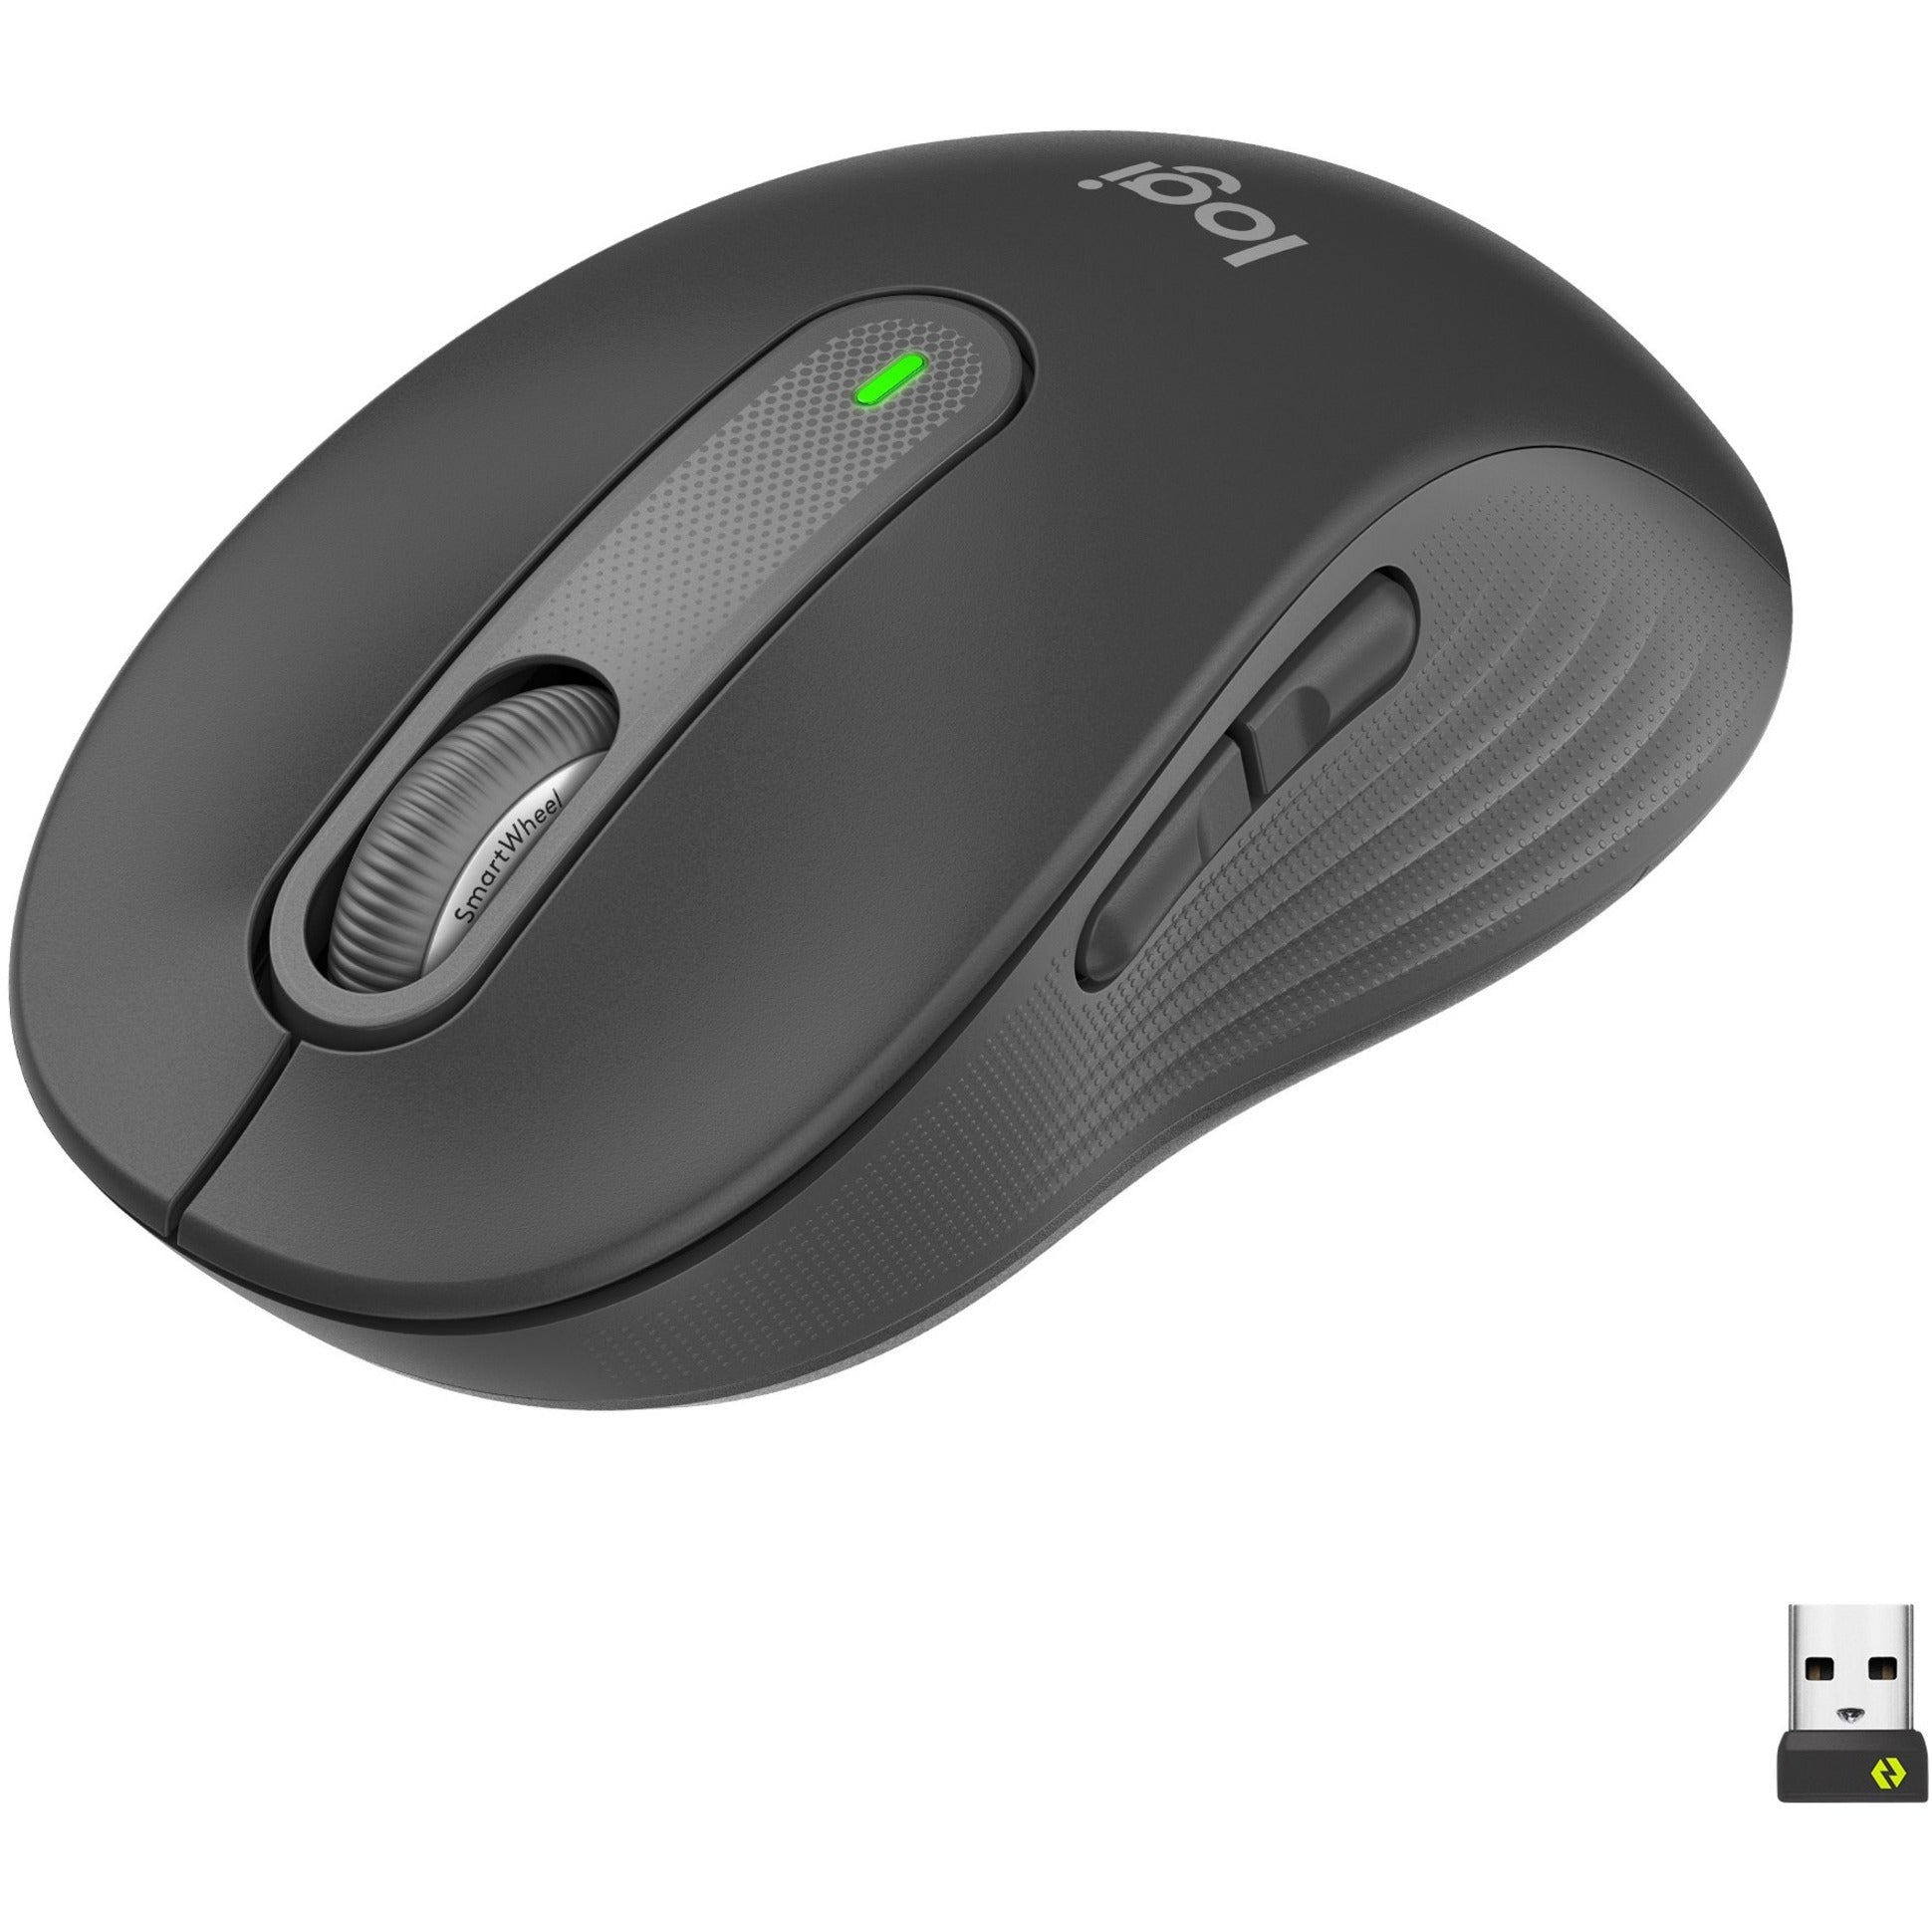 Logitech 910-006250 Signature M650 Mouse, Upgrade to Smarter Scrolling, Better Comfort, and More Productivity